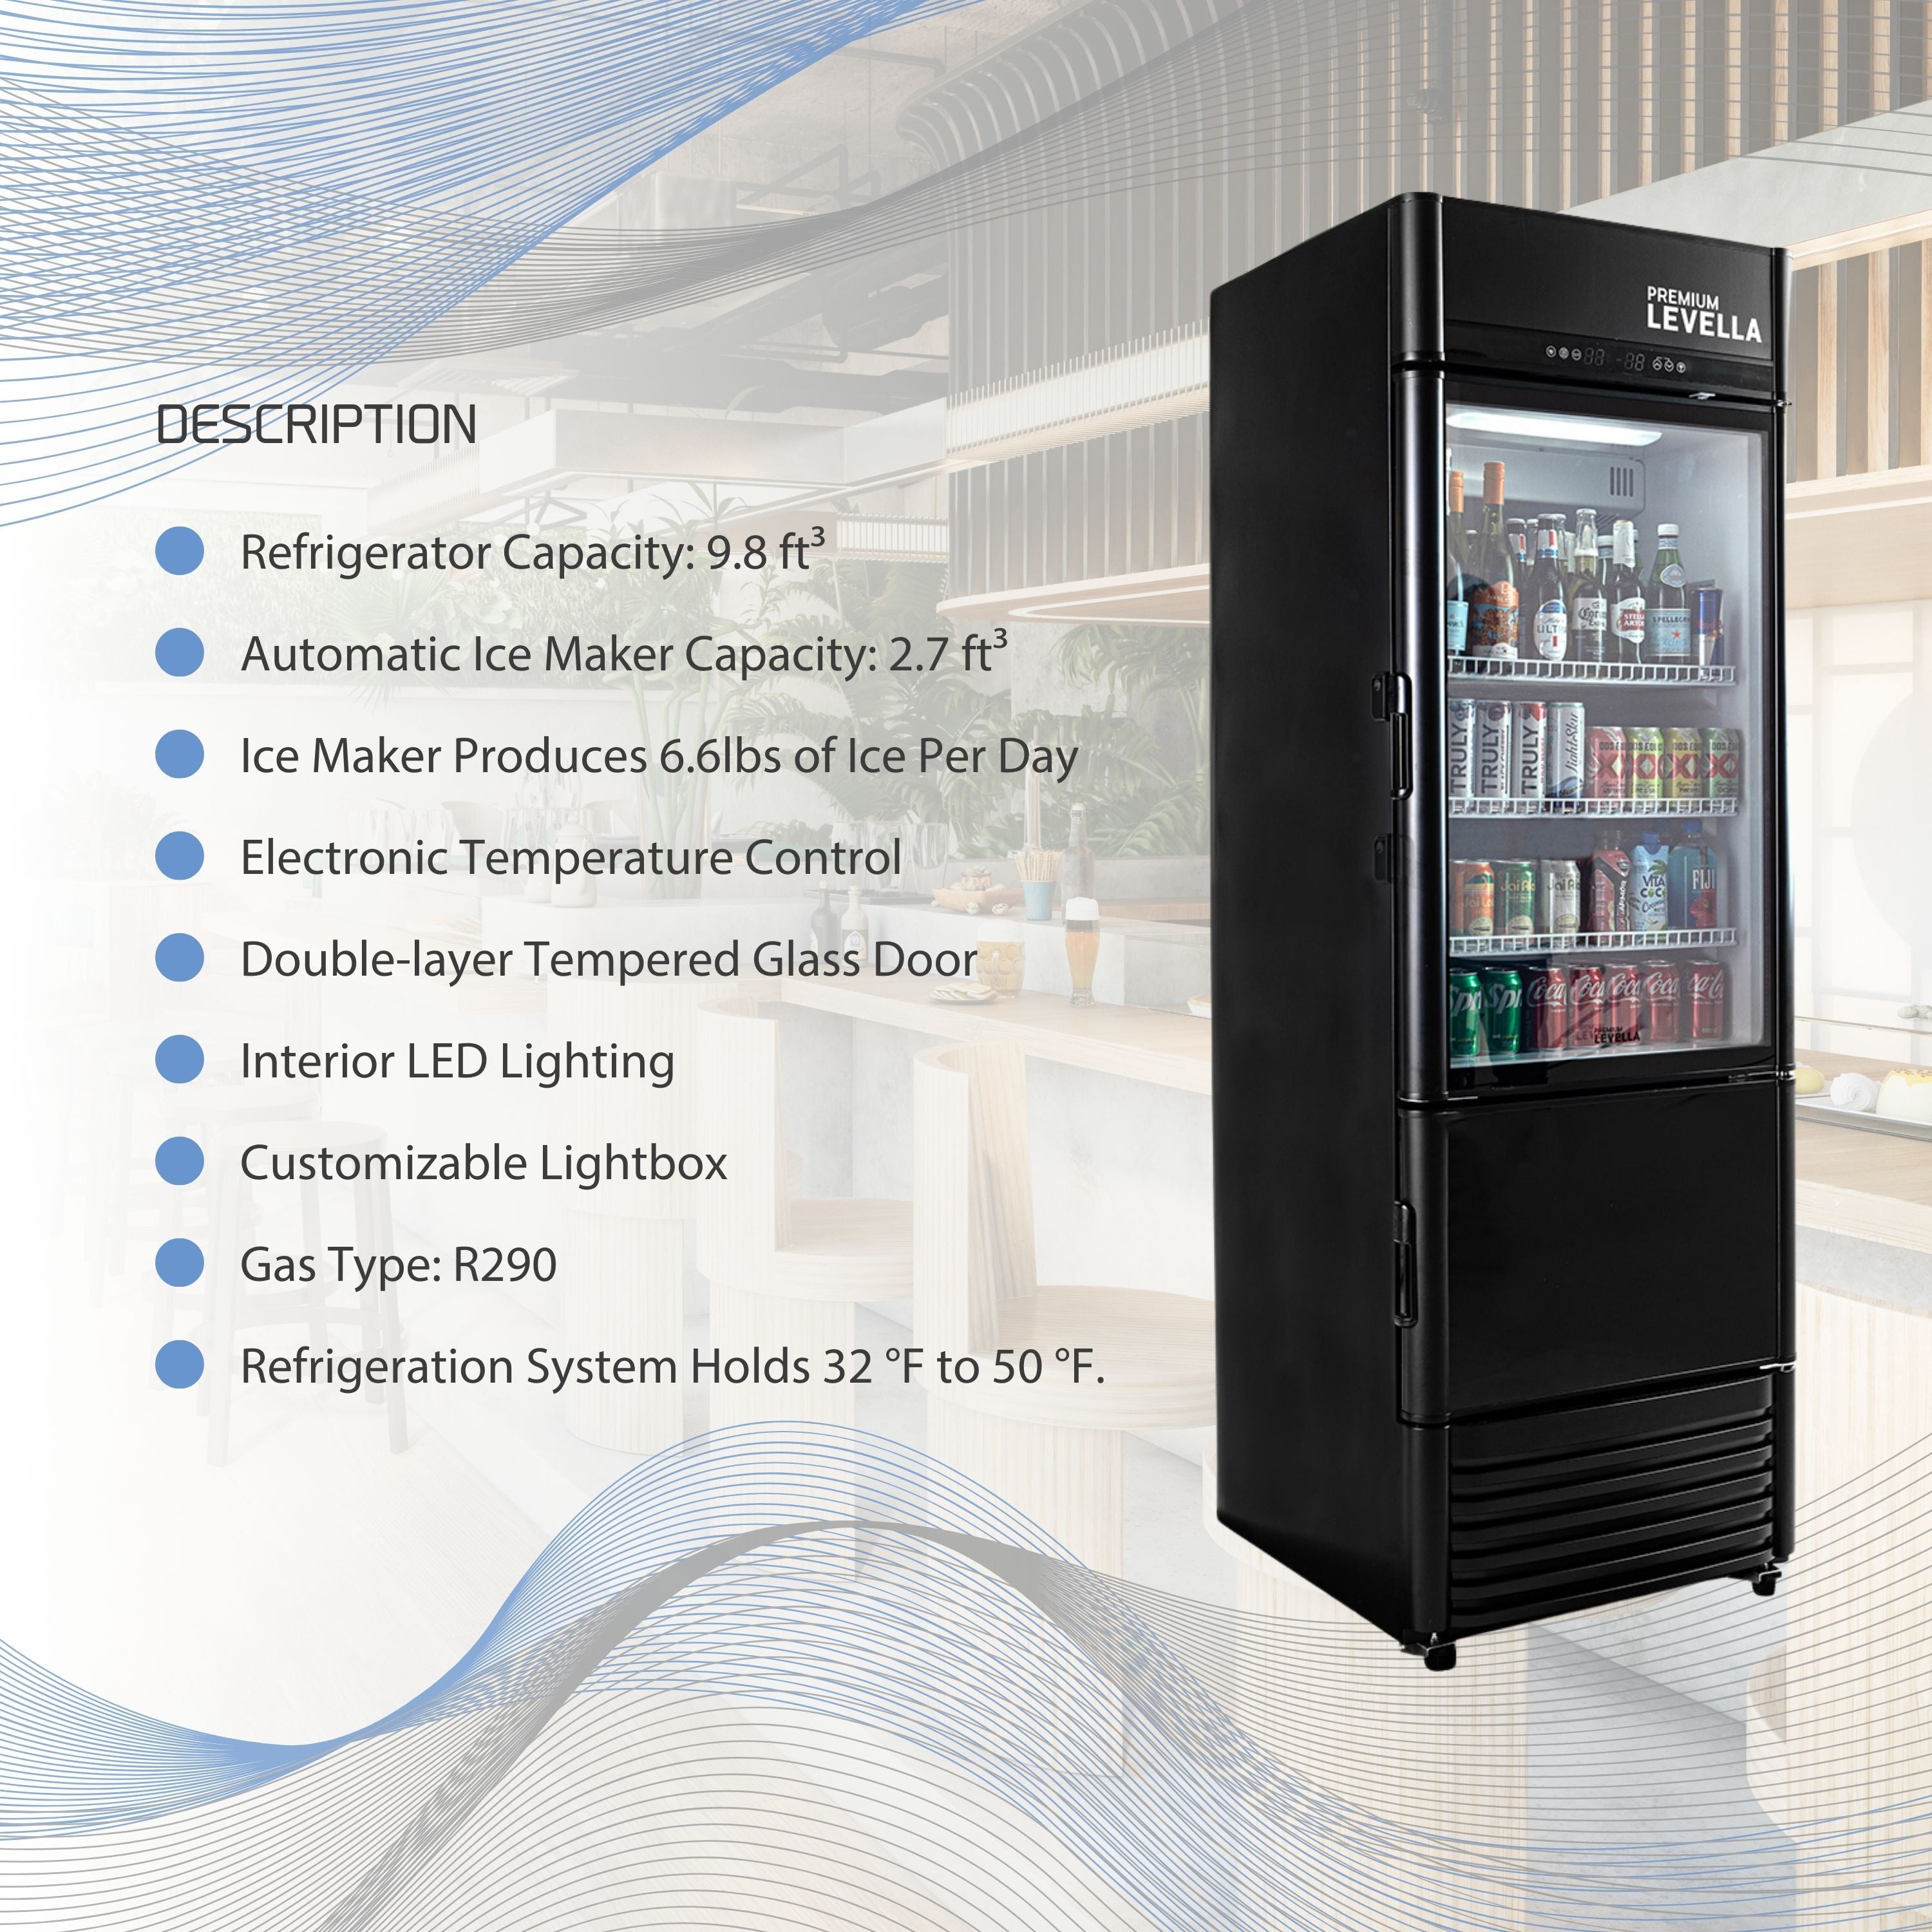 Premium Levella® 12.5 Cu. Ft. Single Glass Door Upright Display Cooler Refrigerator with Automatic Ice Maker.